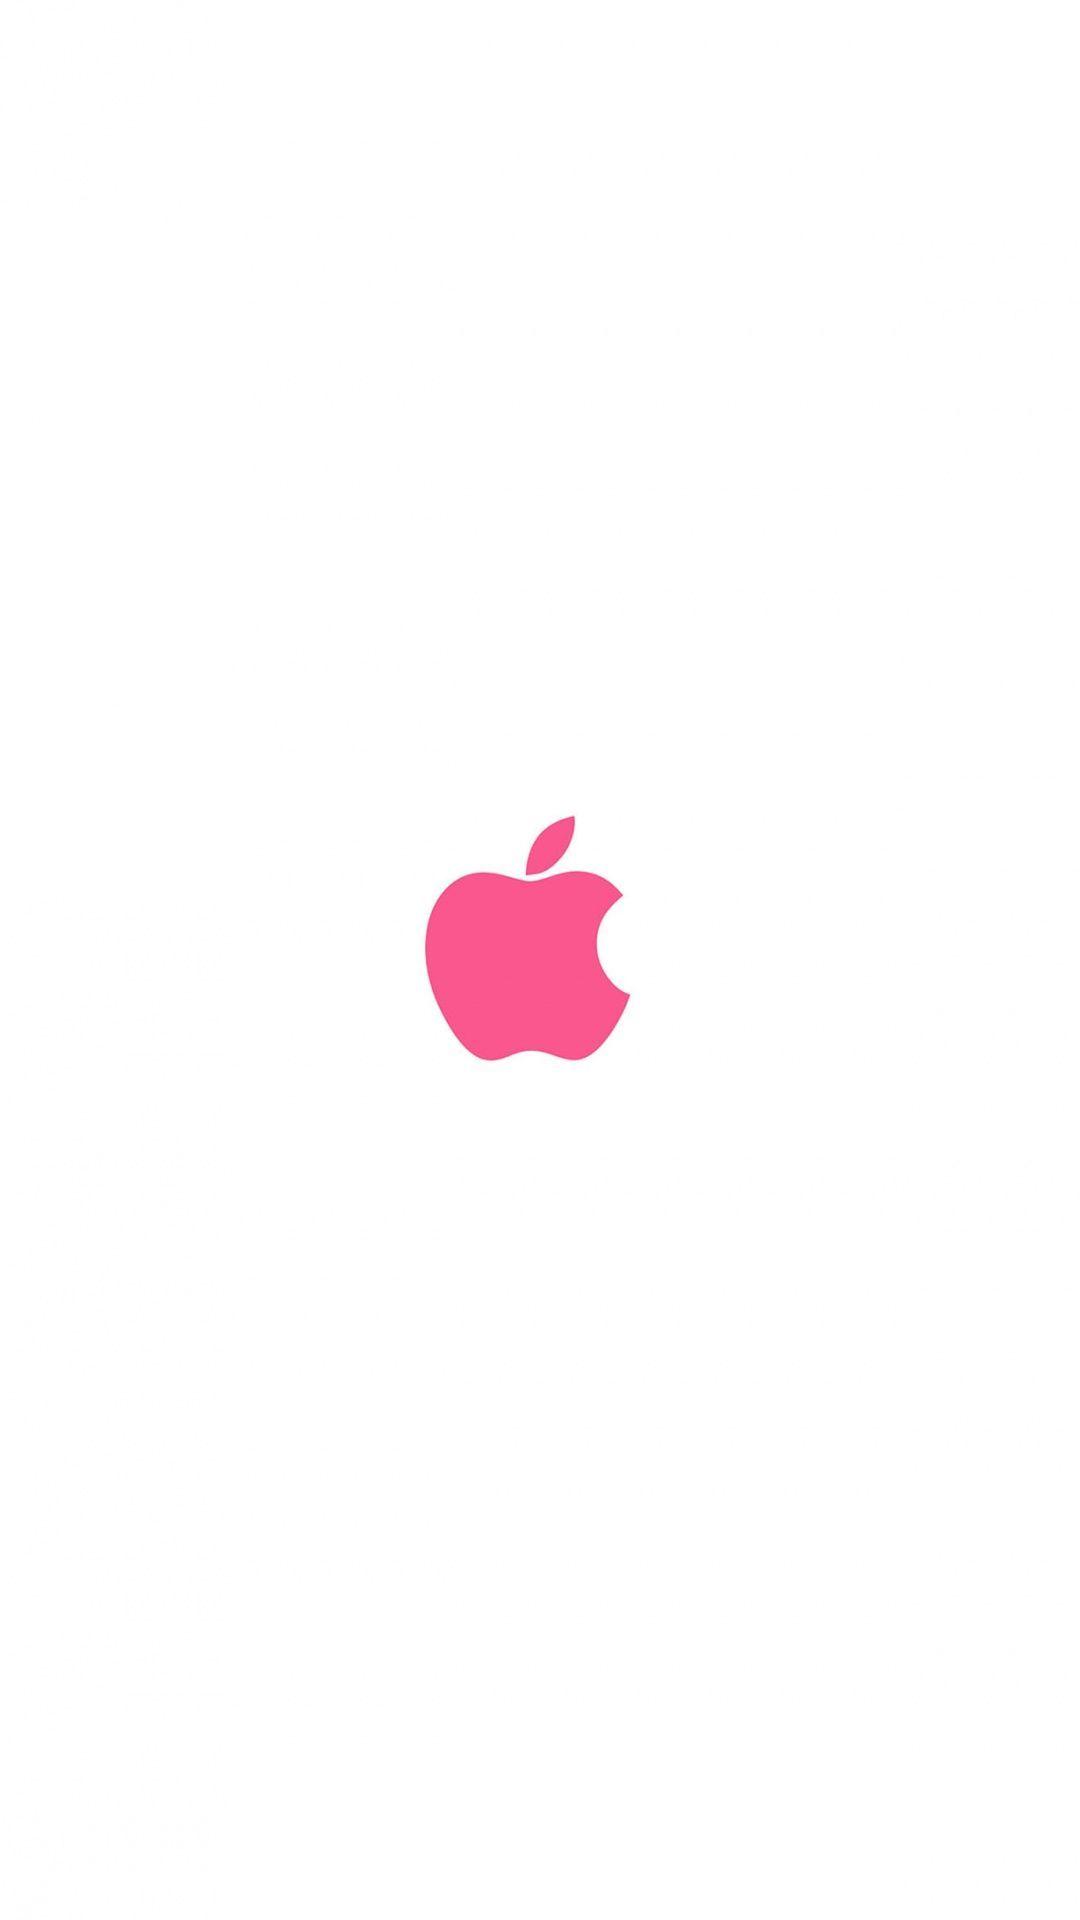 Pink Apple Logo Wallpapers - Top Free Pink Apple Logo Backgrounds ...